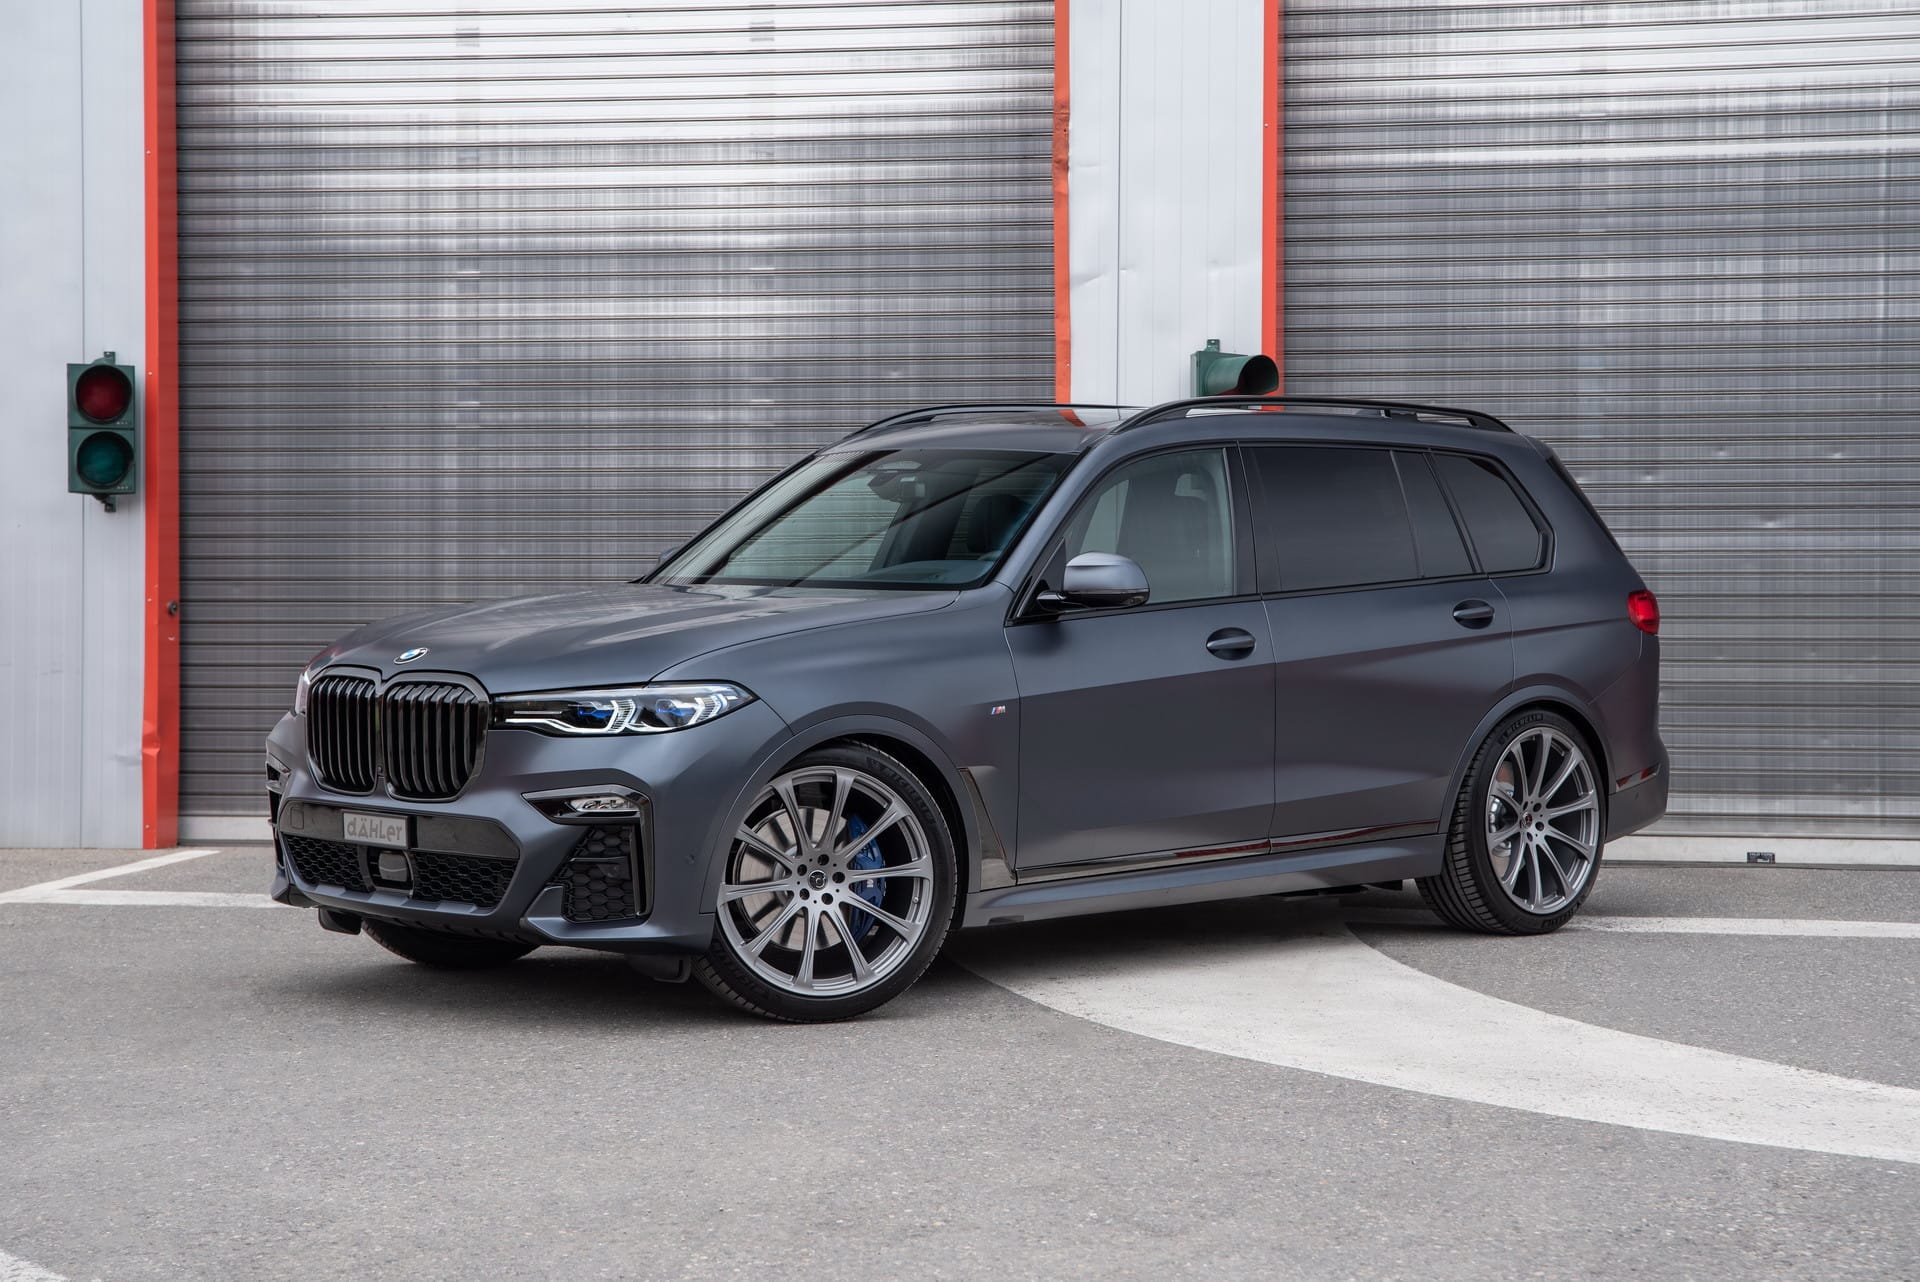 How Much Is A Bmw X7 M50I?